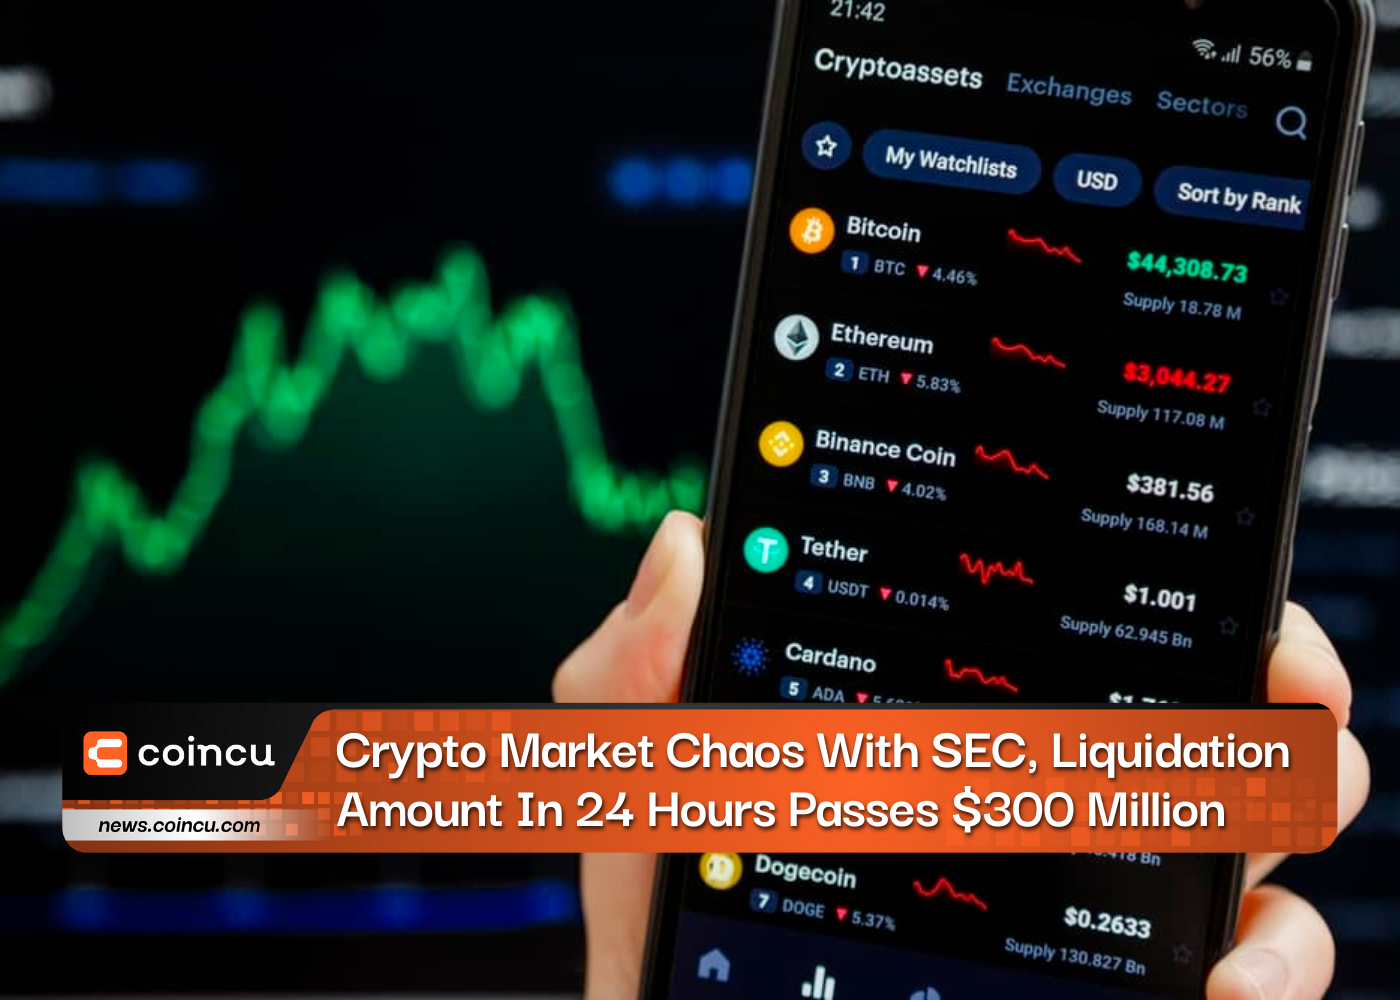 Crypto Market Chaos With SEC, Liquidation Amount In 24 Hours Passes $300 Million